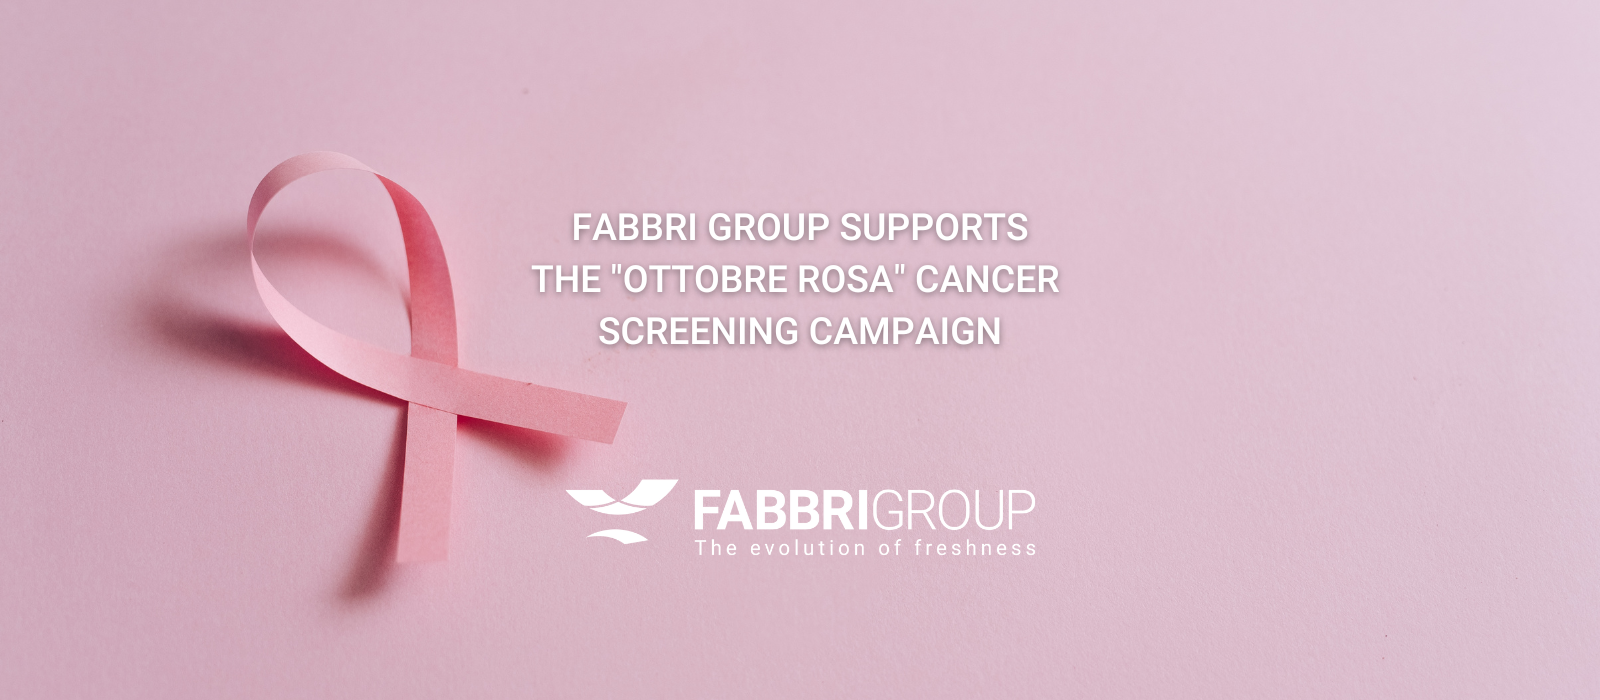 FABBRI GROUP SUPPORTS THE ITALIAN SCREENING CAMPAIGN AGAINST CANCER “OTTOBRE ROSA”